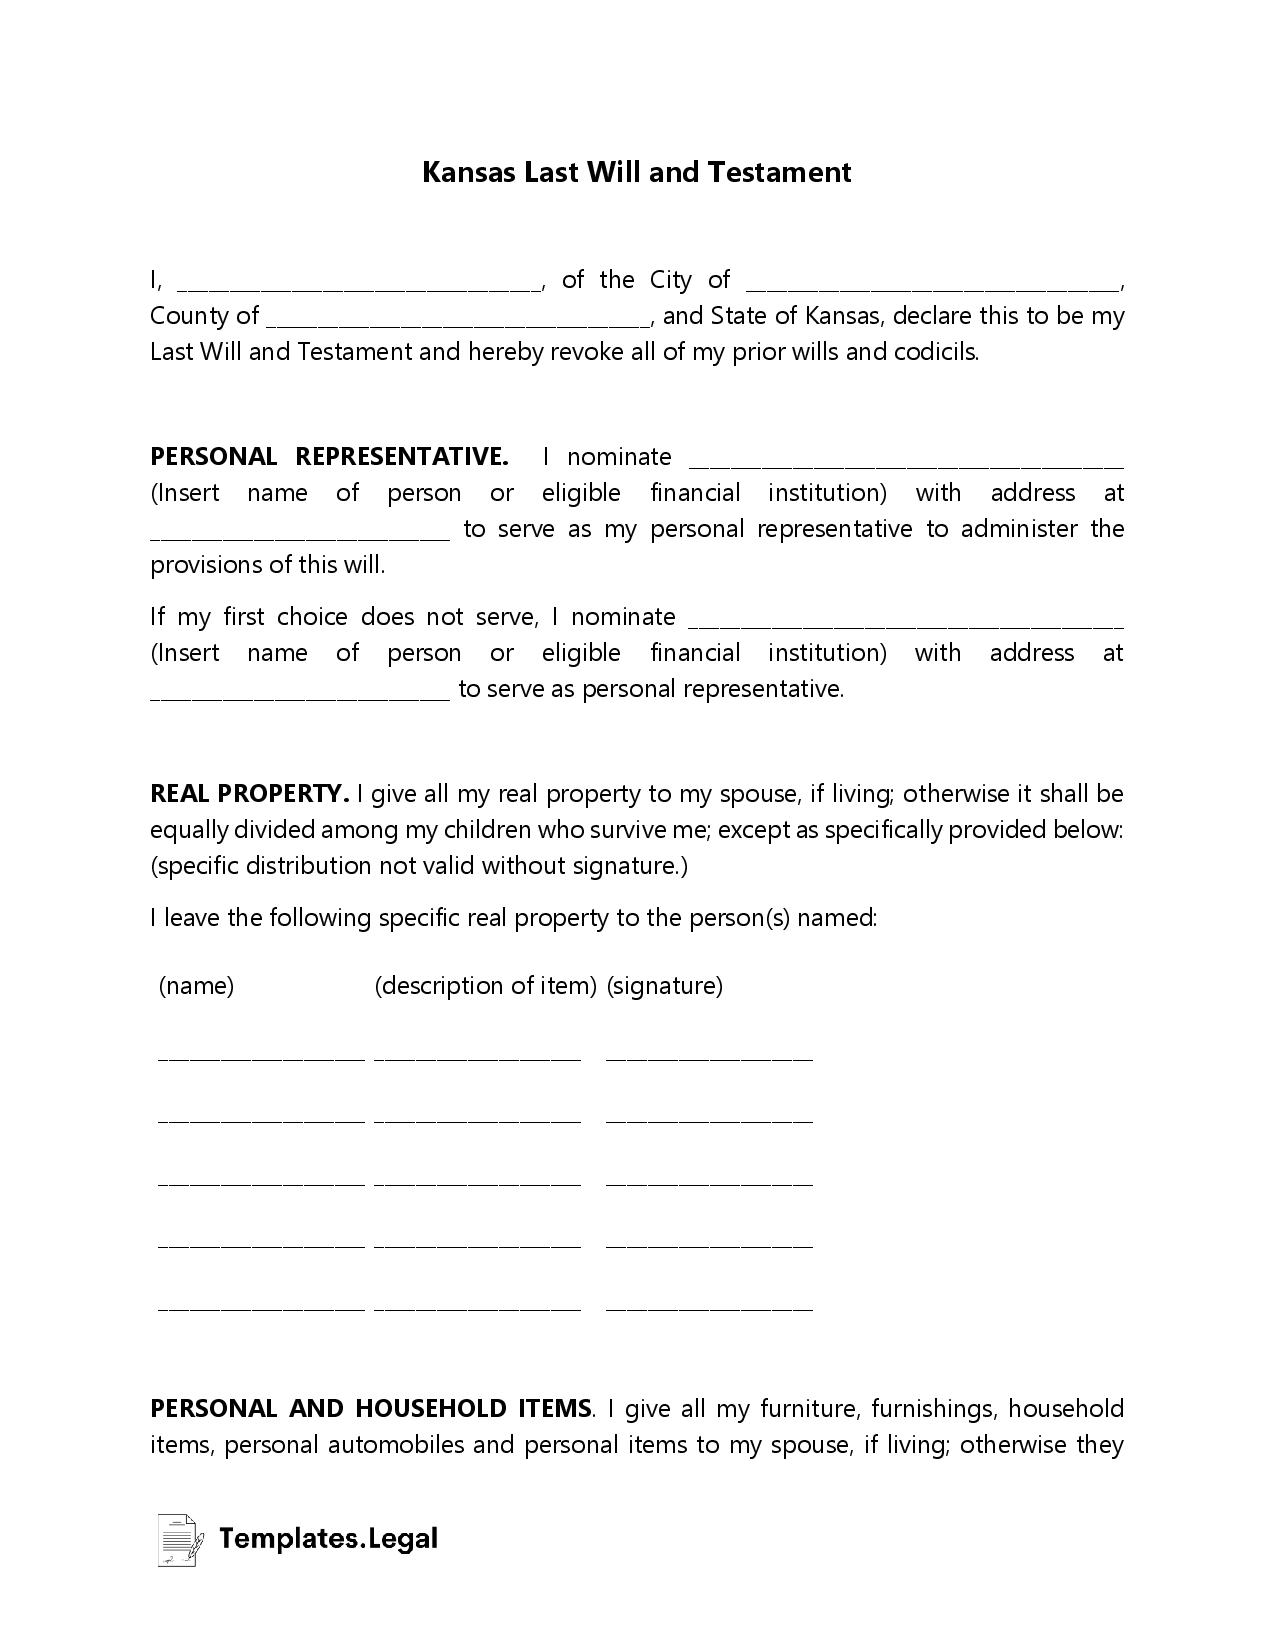 Kansas Last Will and Testament - Templates.Legal